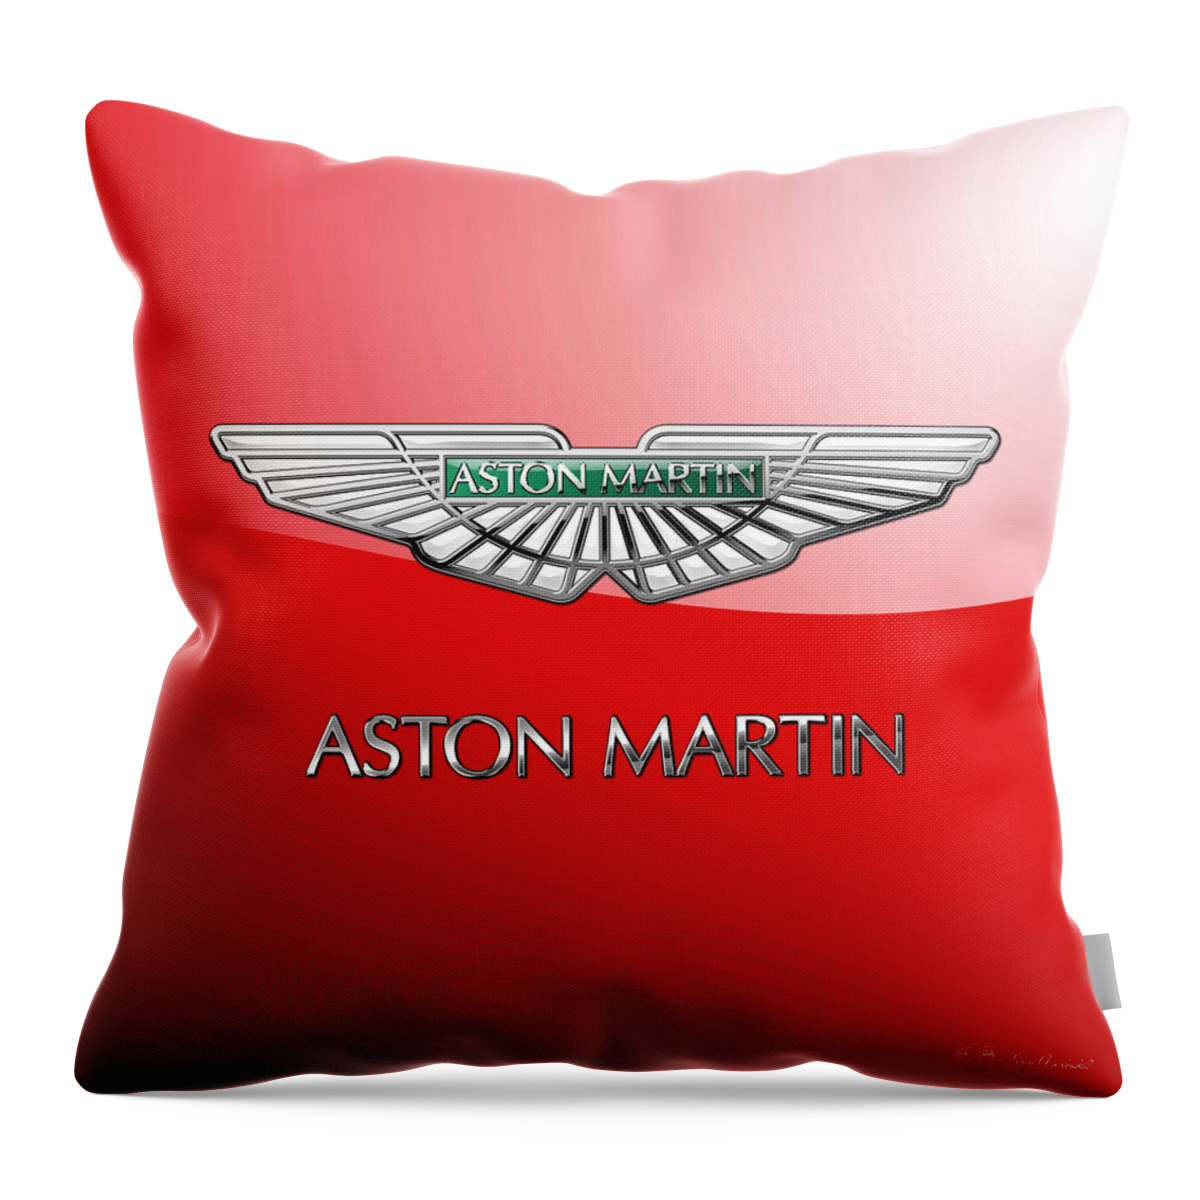 Wheels Of Fortune� Collection By Serge Averbukh Throw Pillow featuring the photograph Aston Martin - 3 D Badge on Red by Serge Averbukh